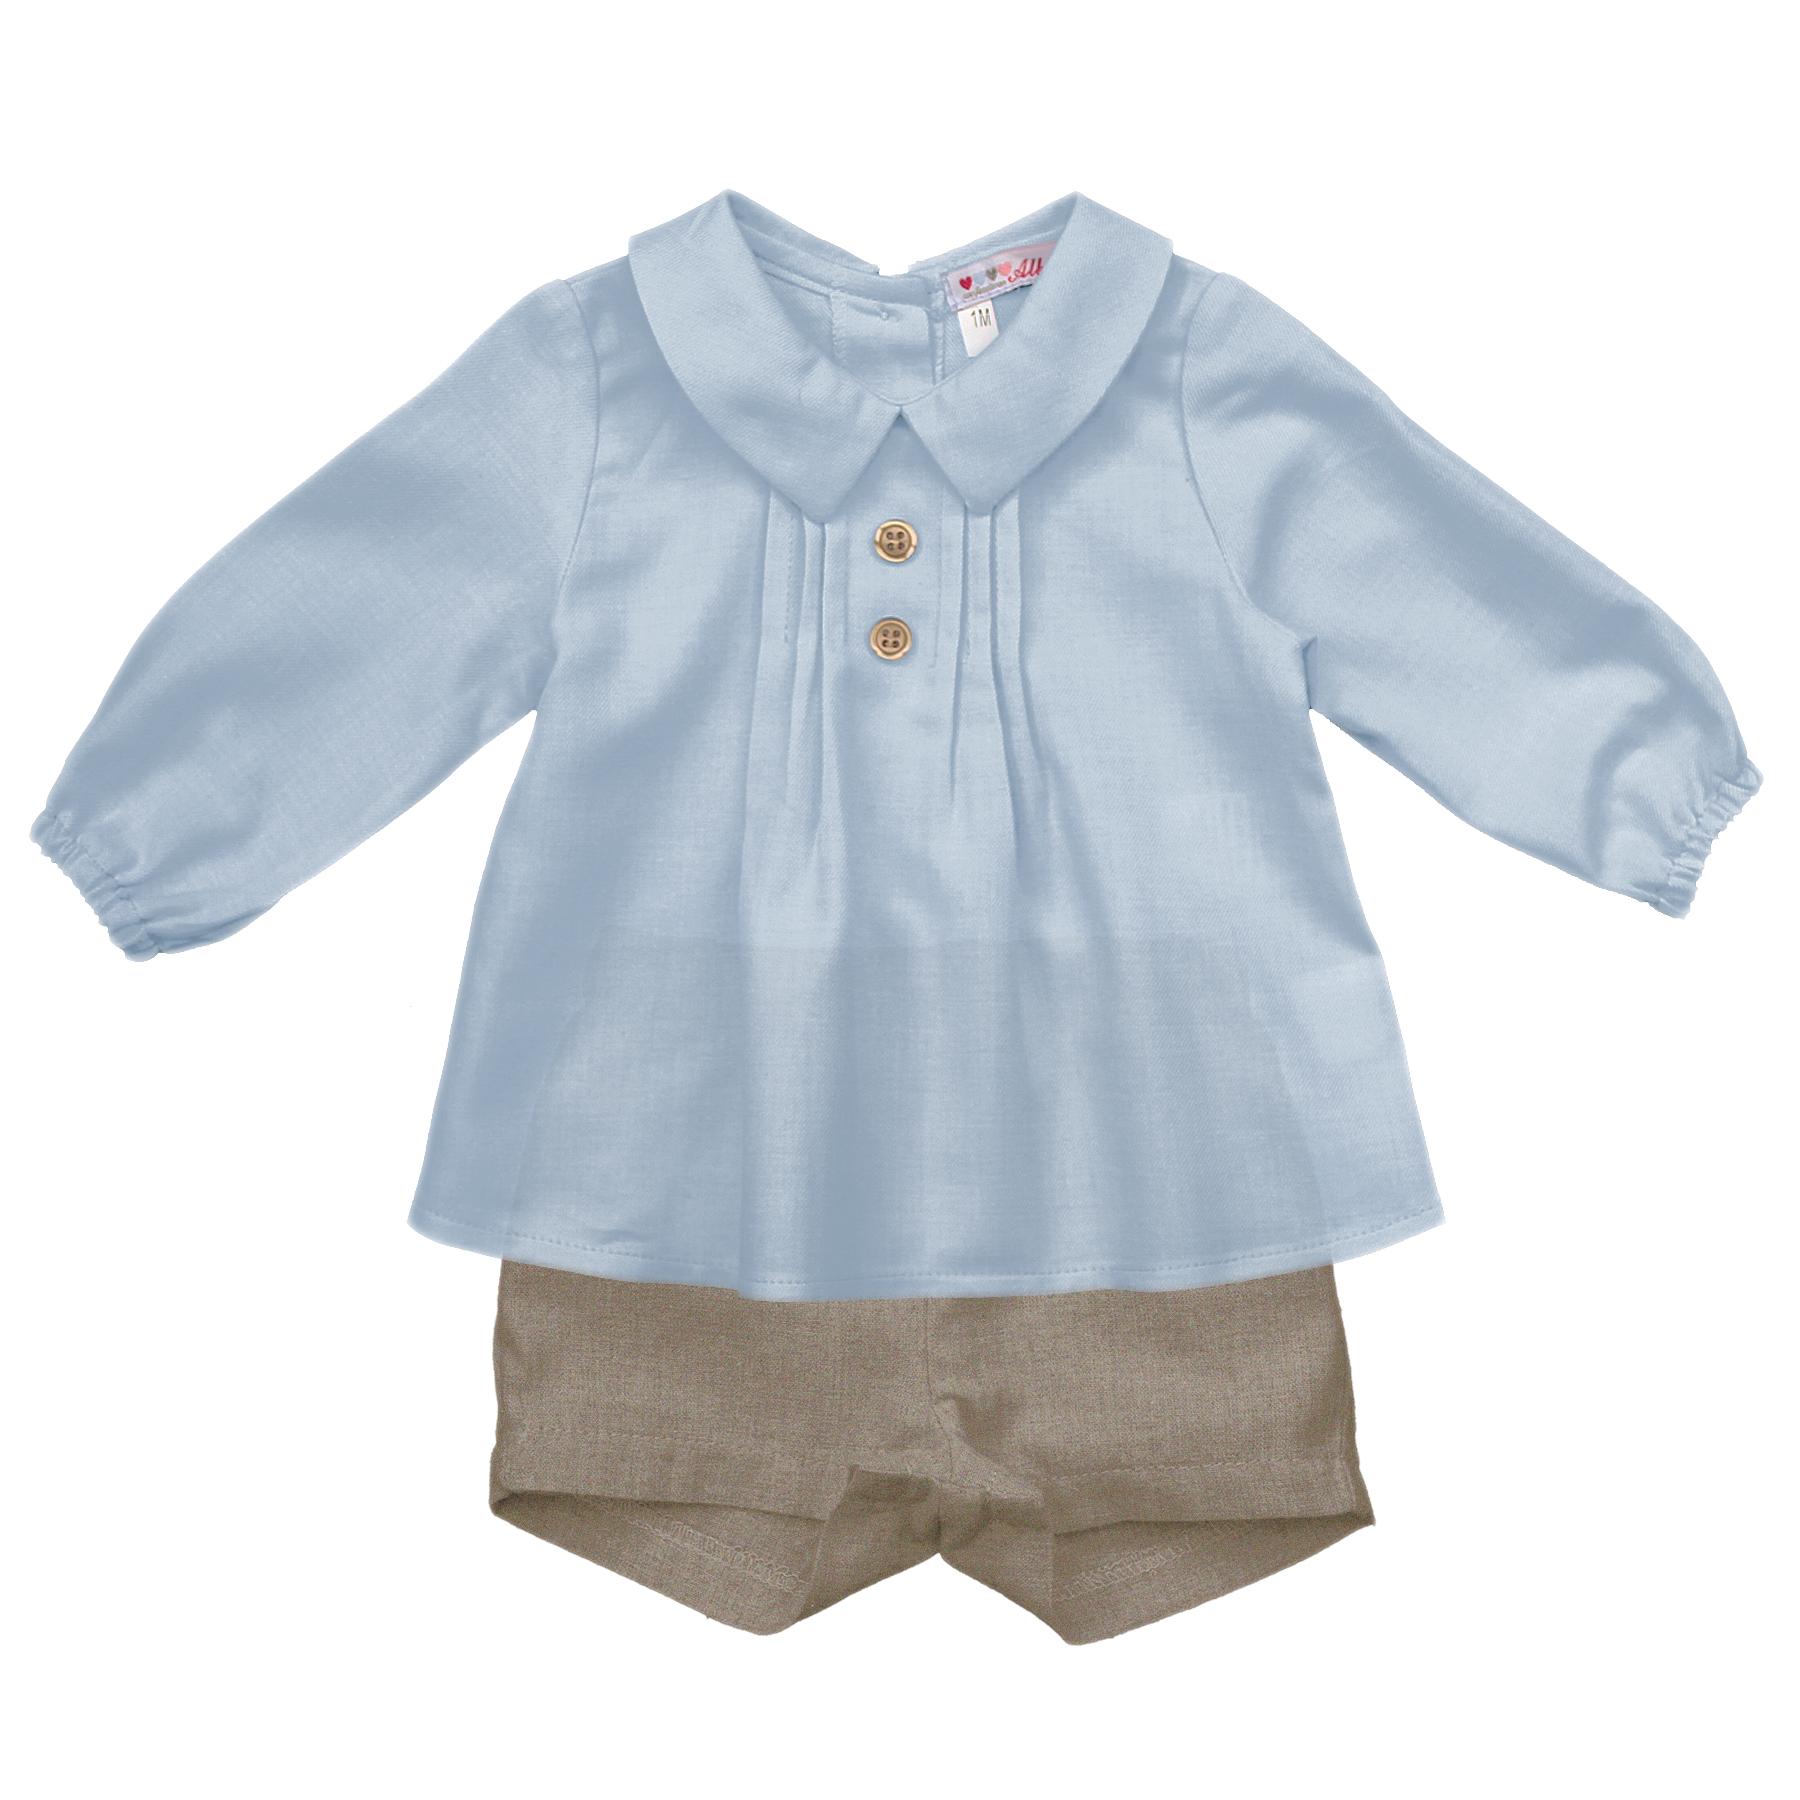 Alber blue canvas top with sand shorts